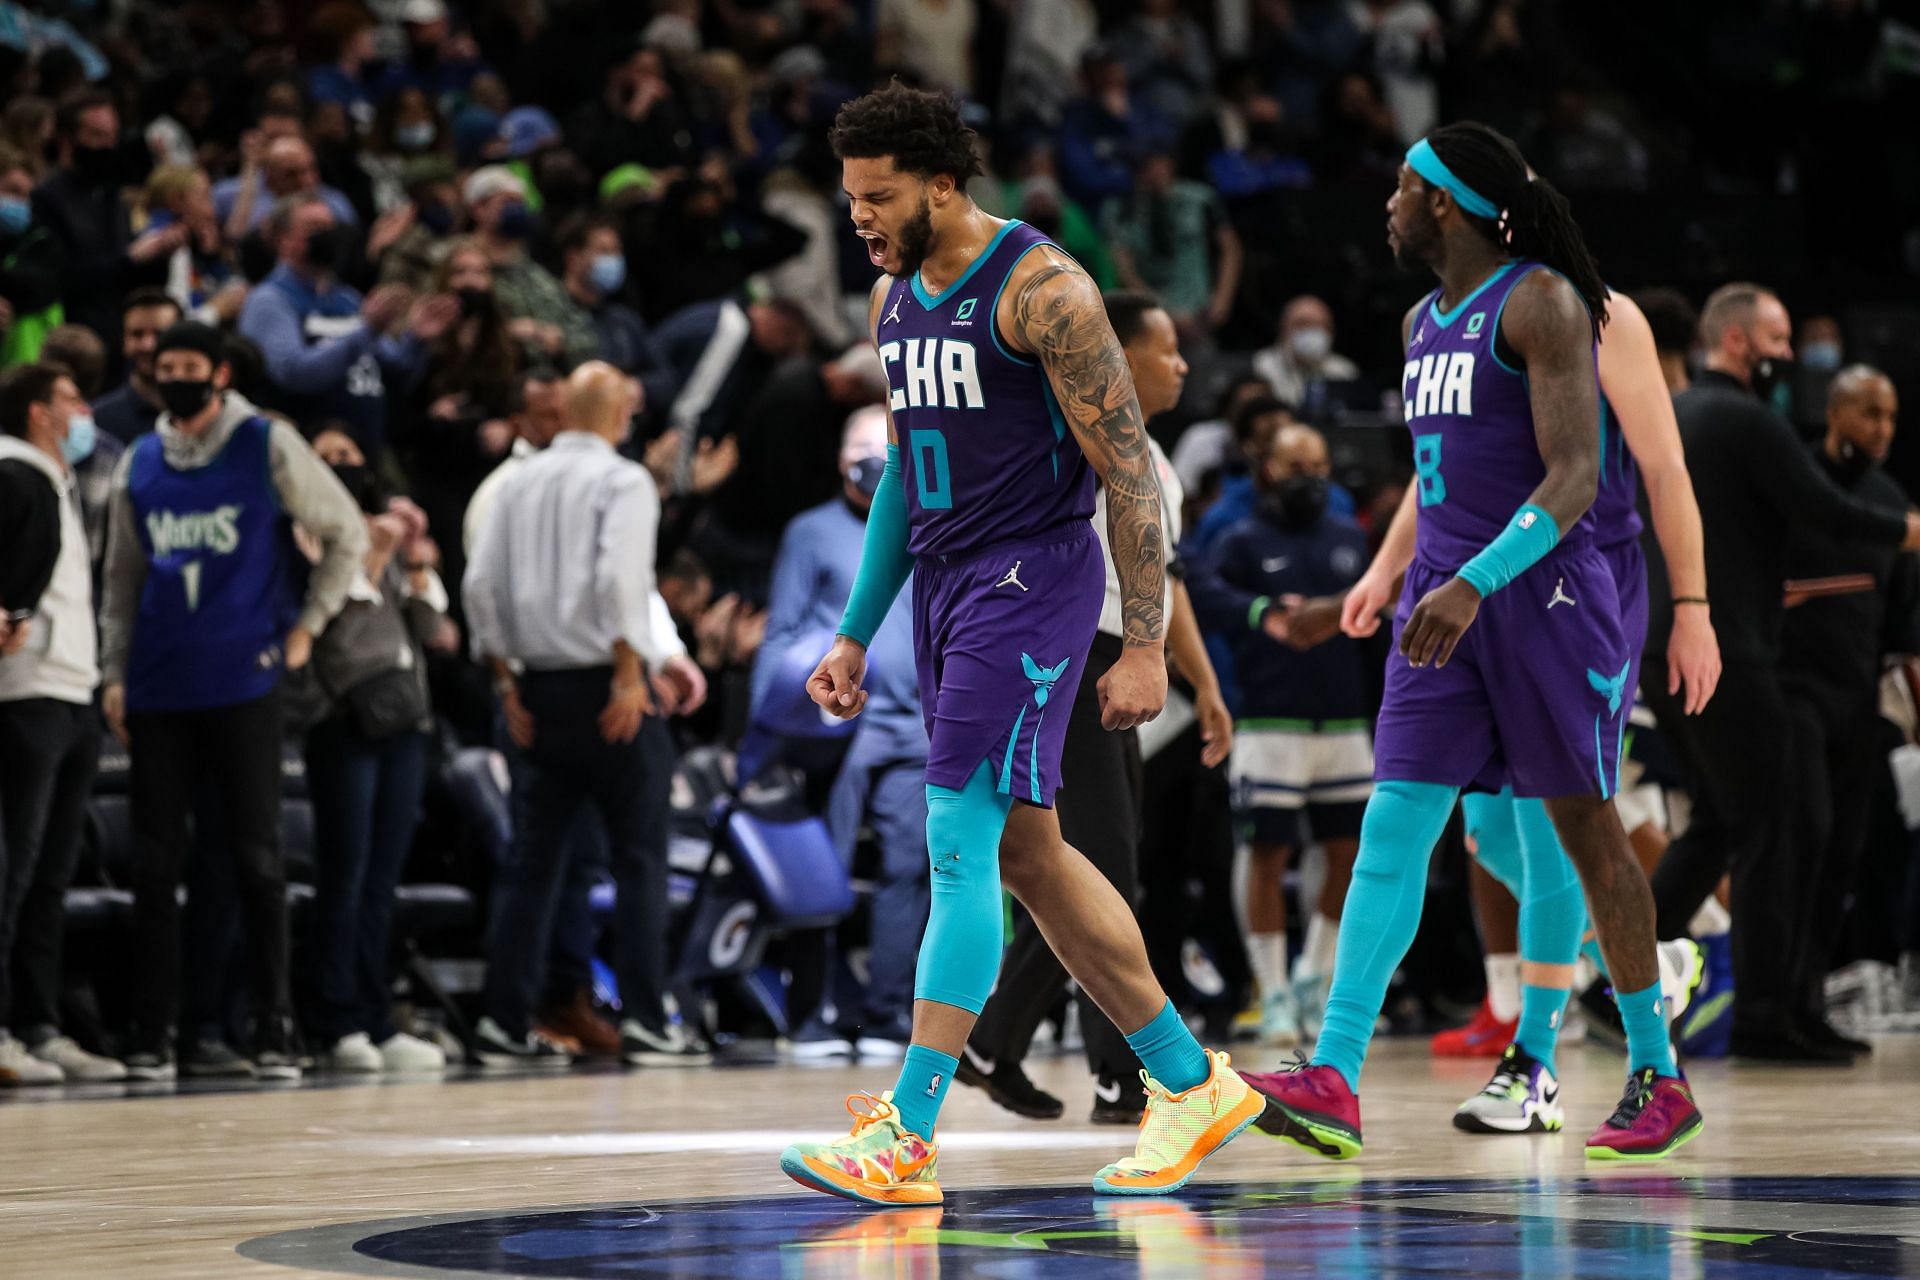 Miles Bridges celebrates a play with the Charlotte Hornets